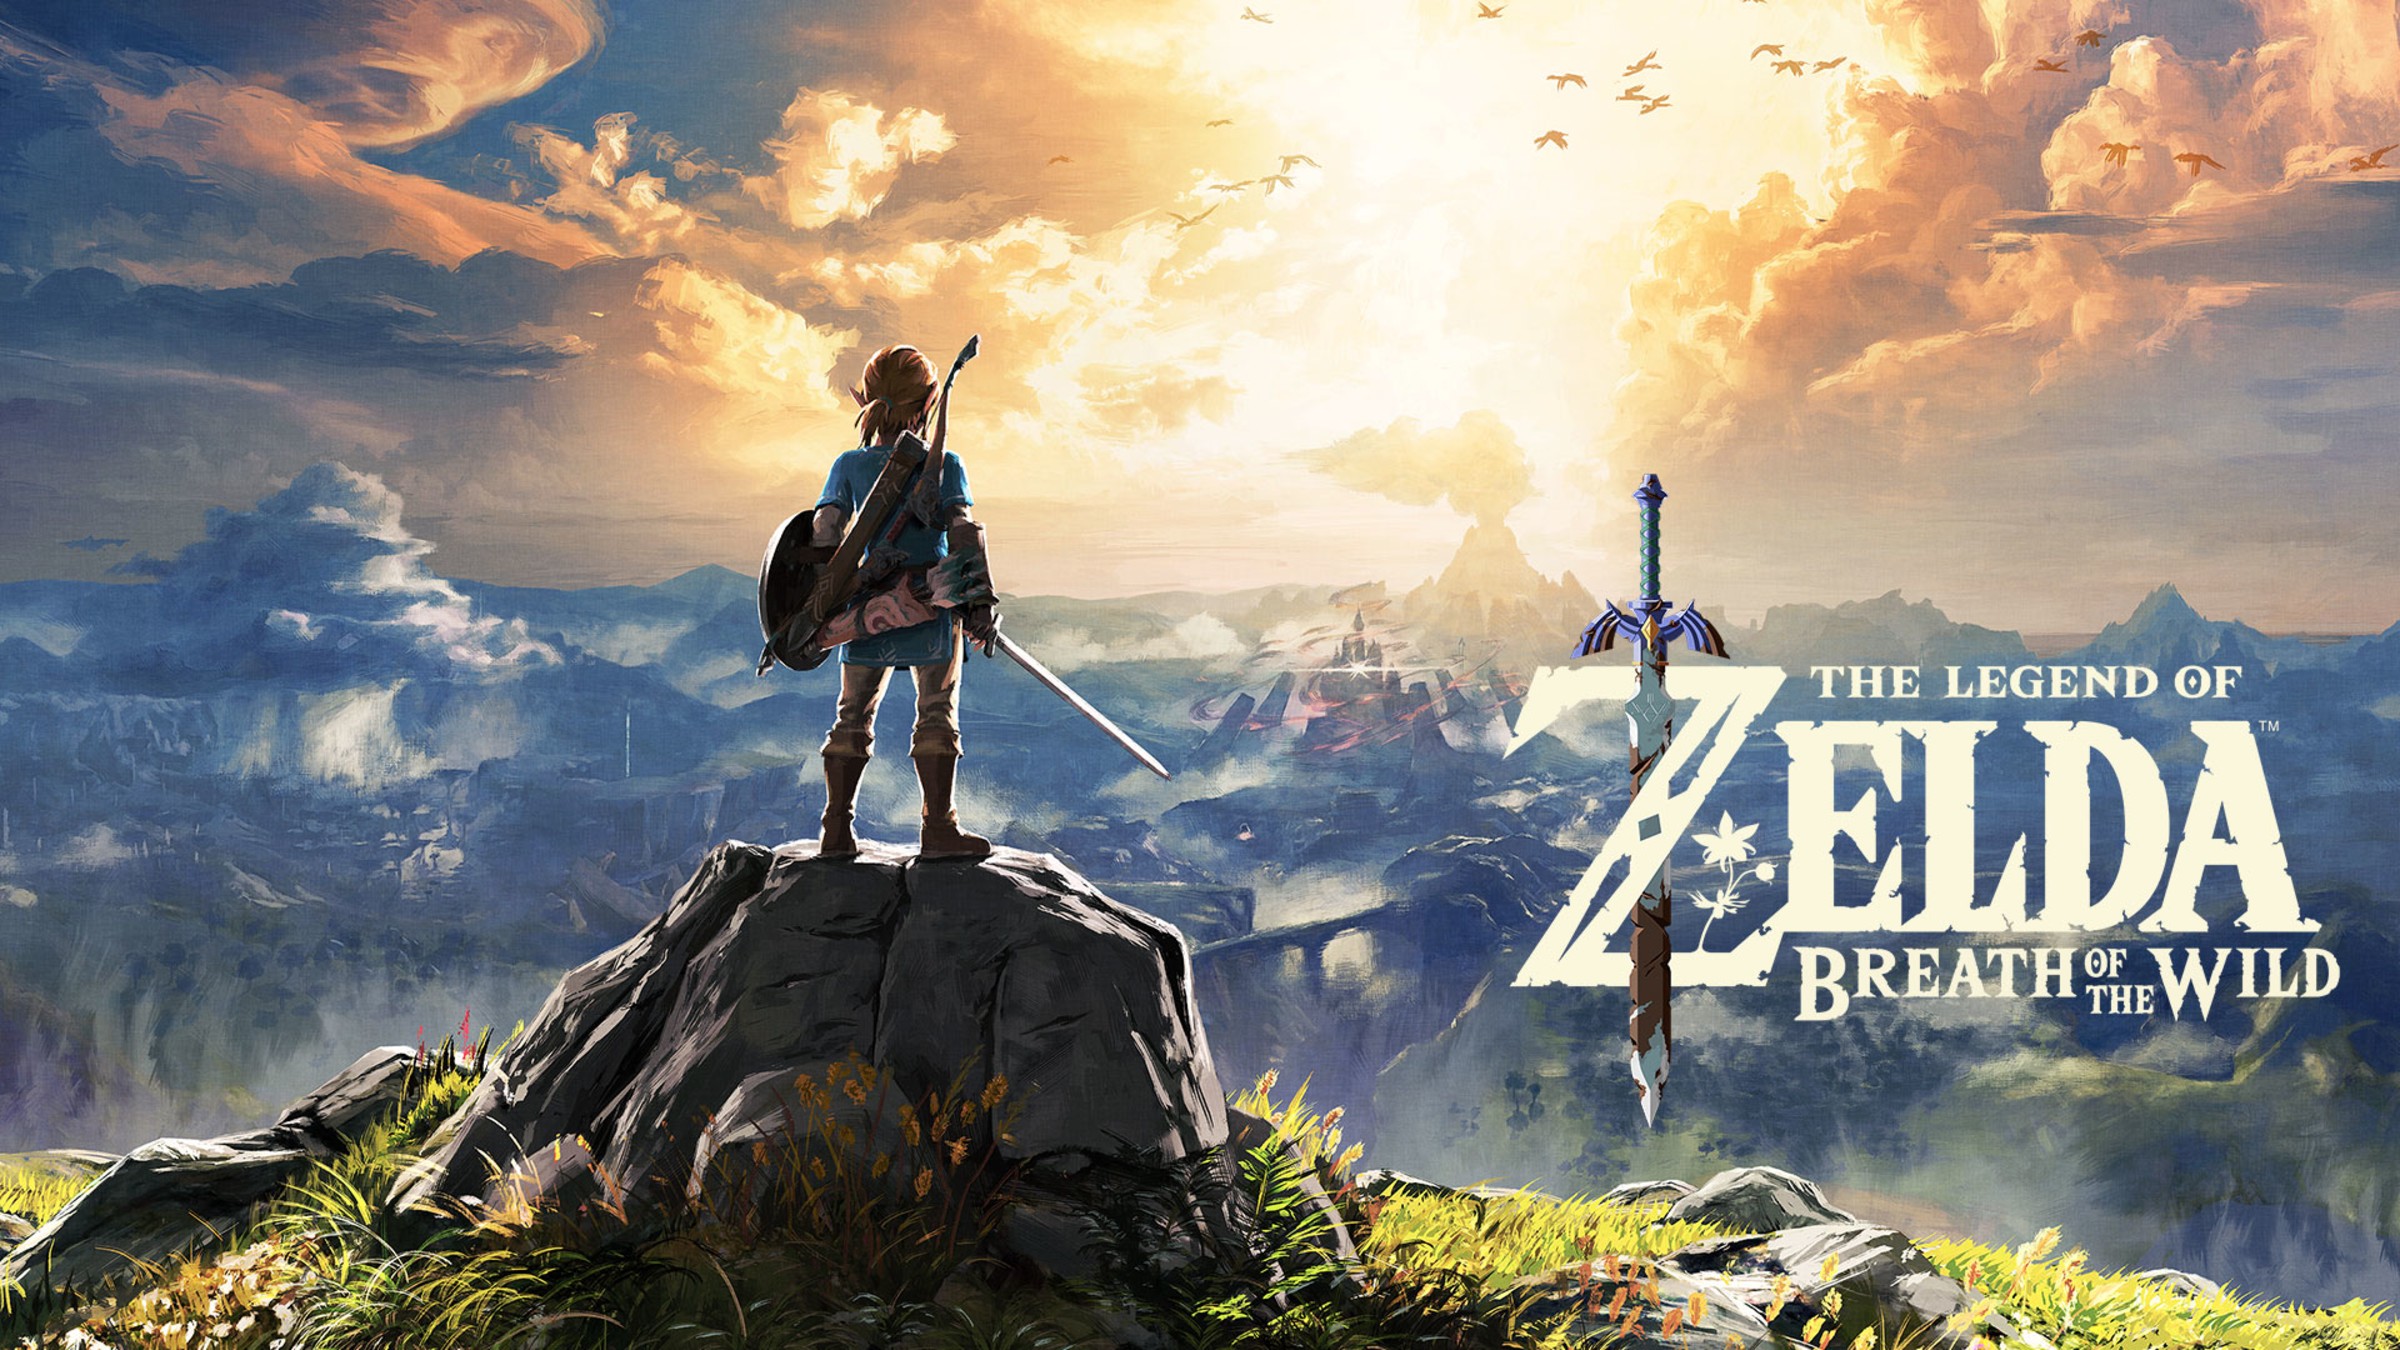 The Legend Of Zelda Breath Of The Wild For Nintendo Switch Nintendo Official Site